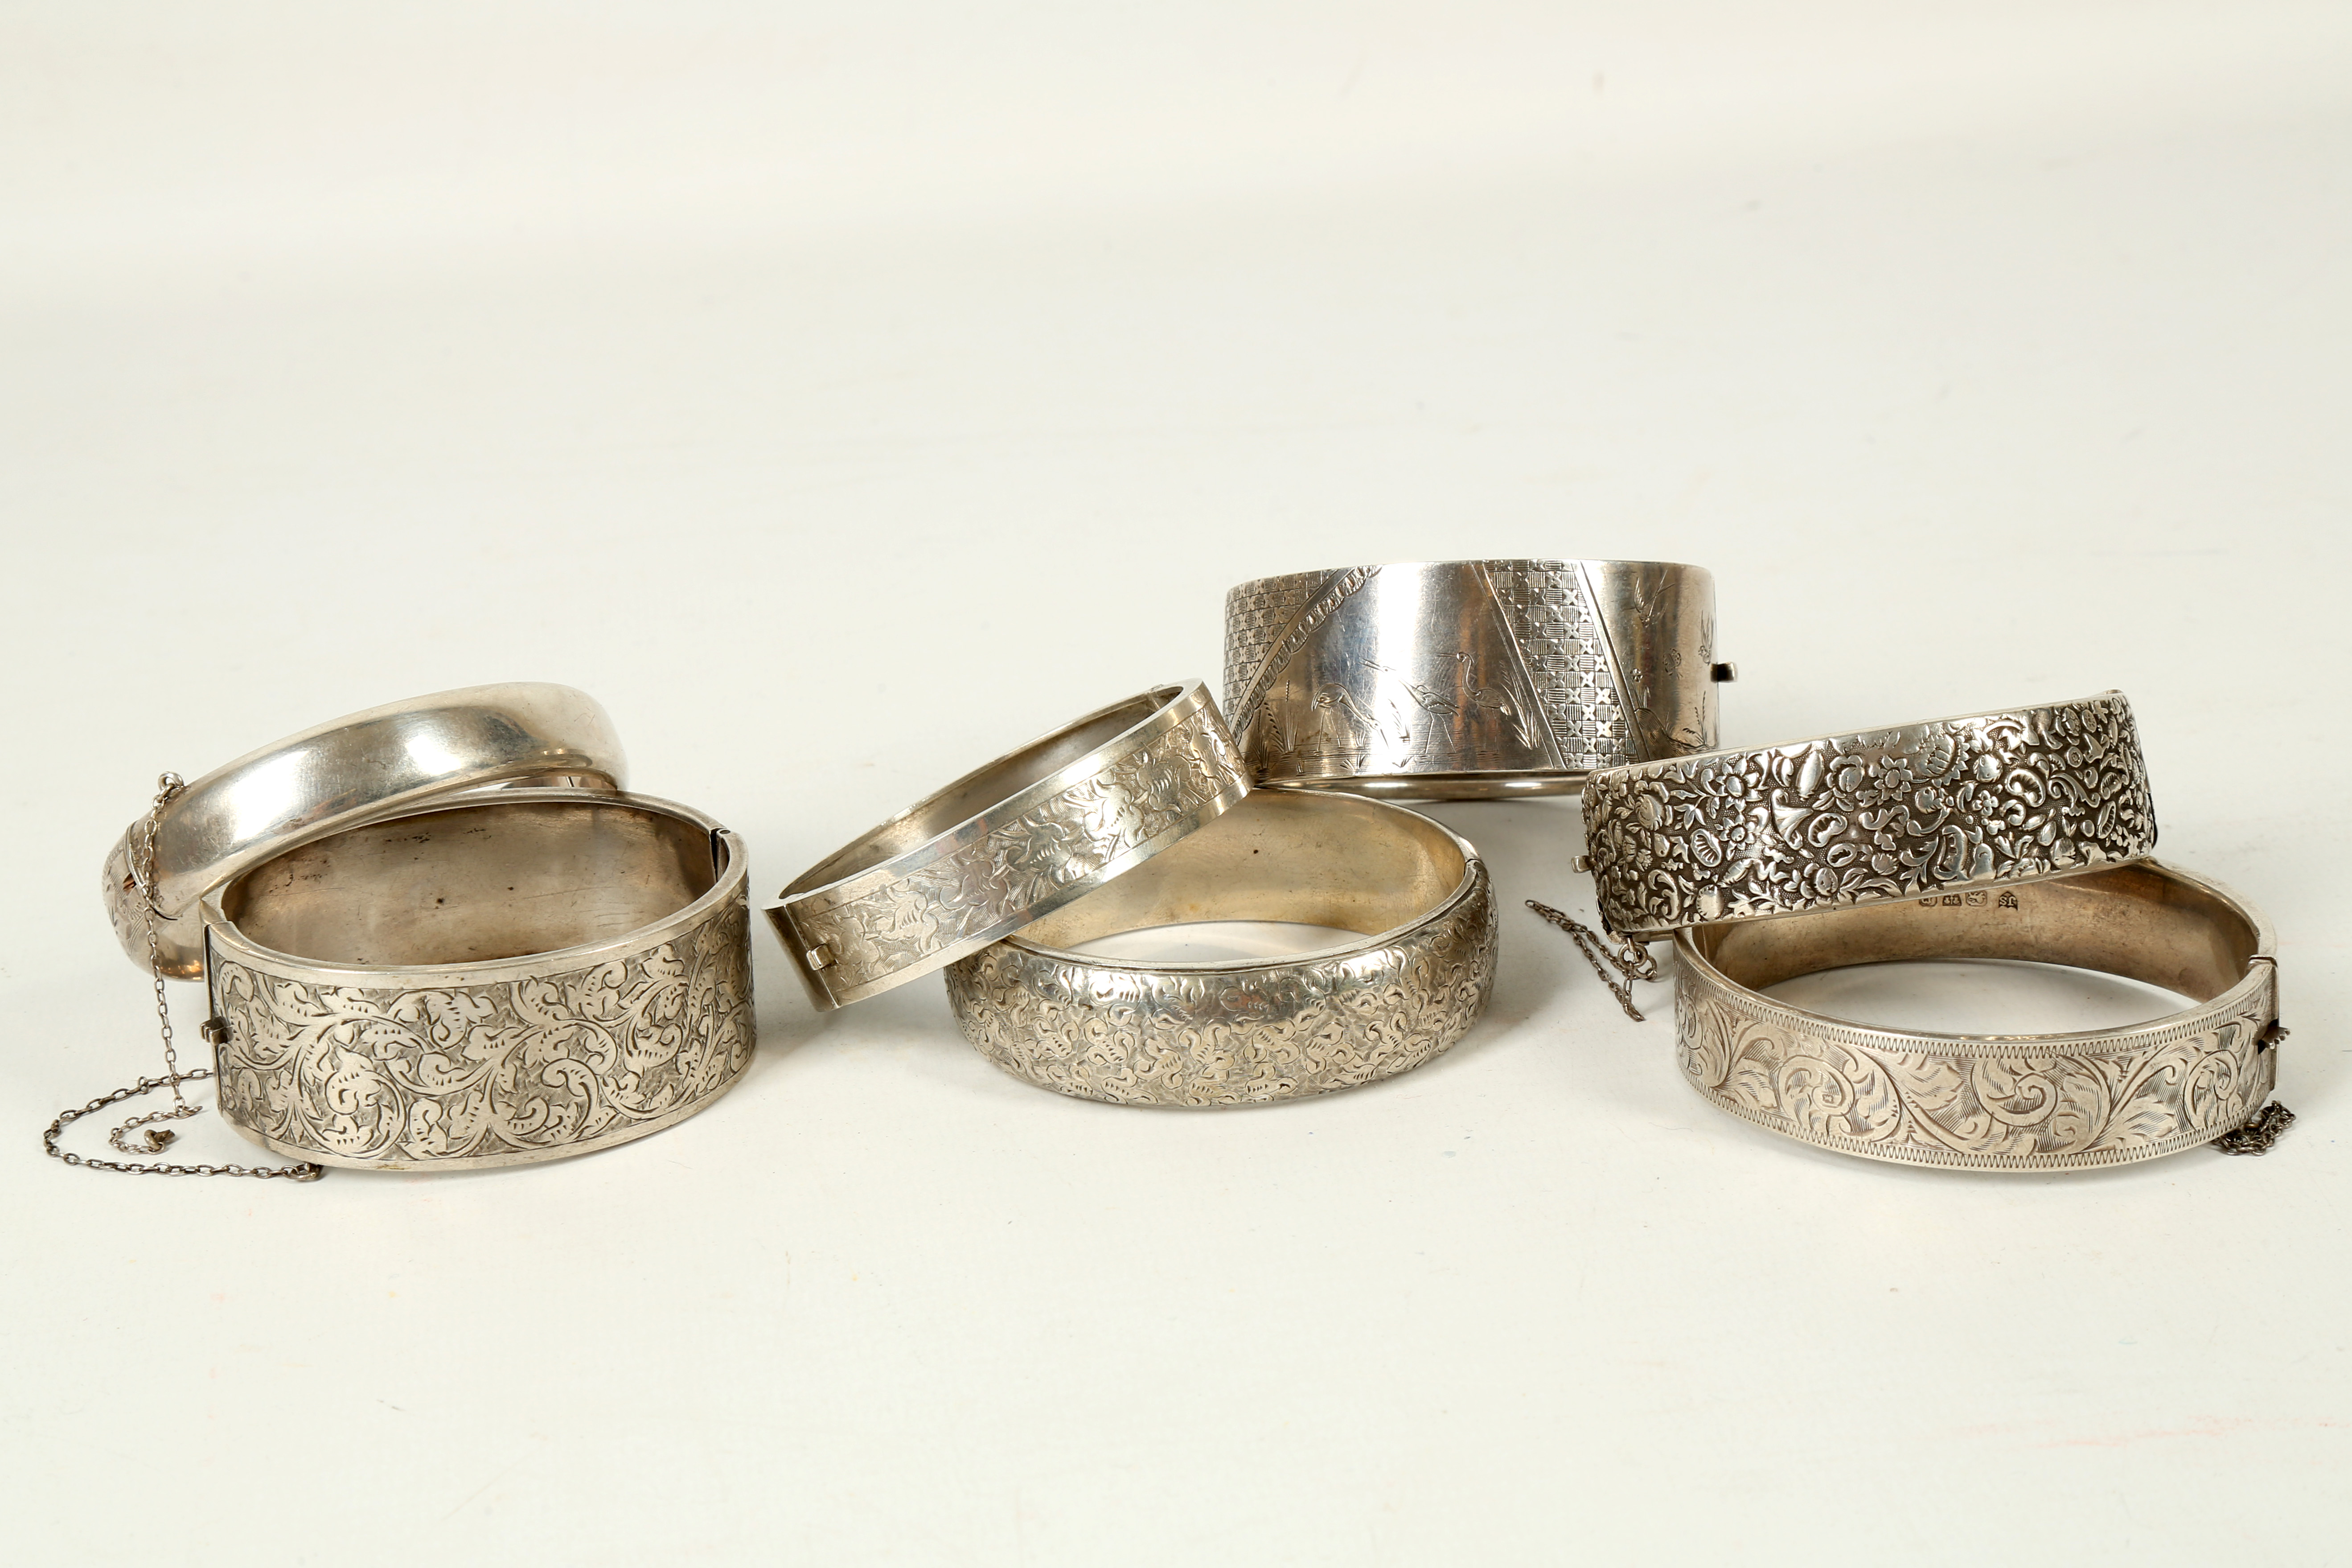 Two Victorian style engraved silver hinged bangles, an Indian white metal bangle and four further